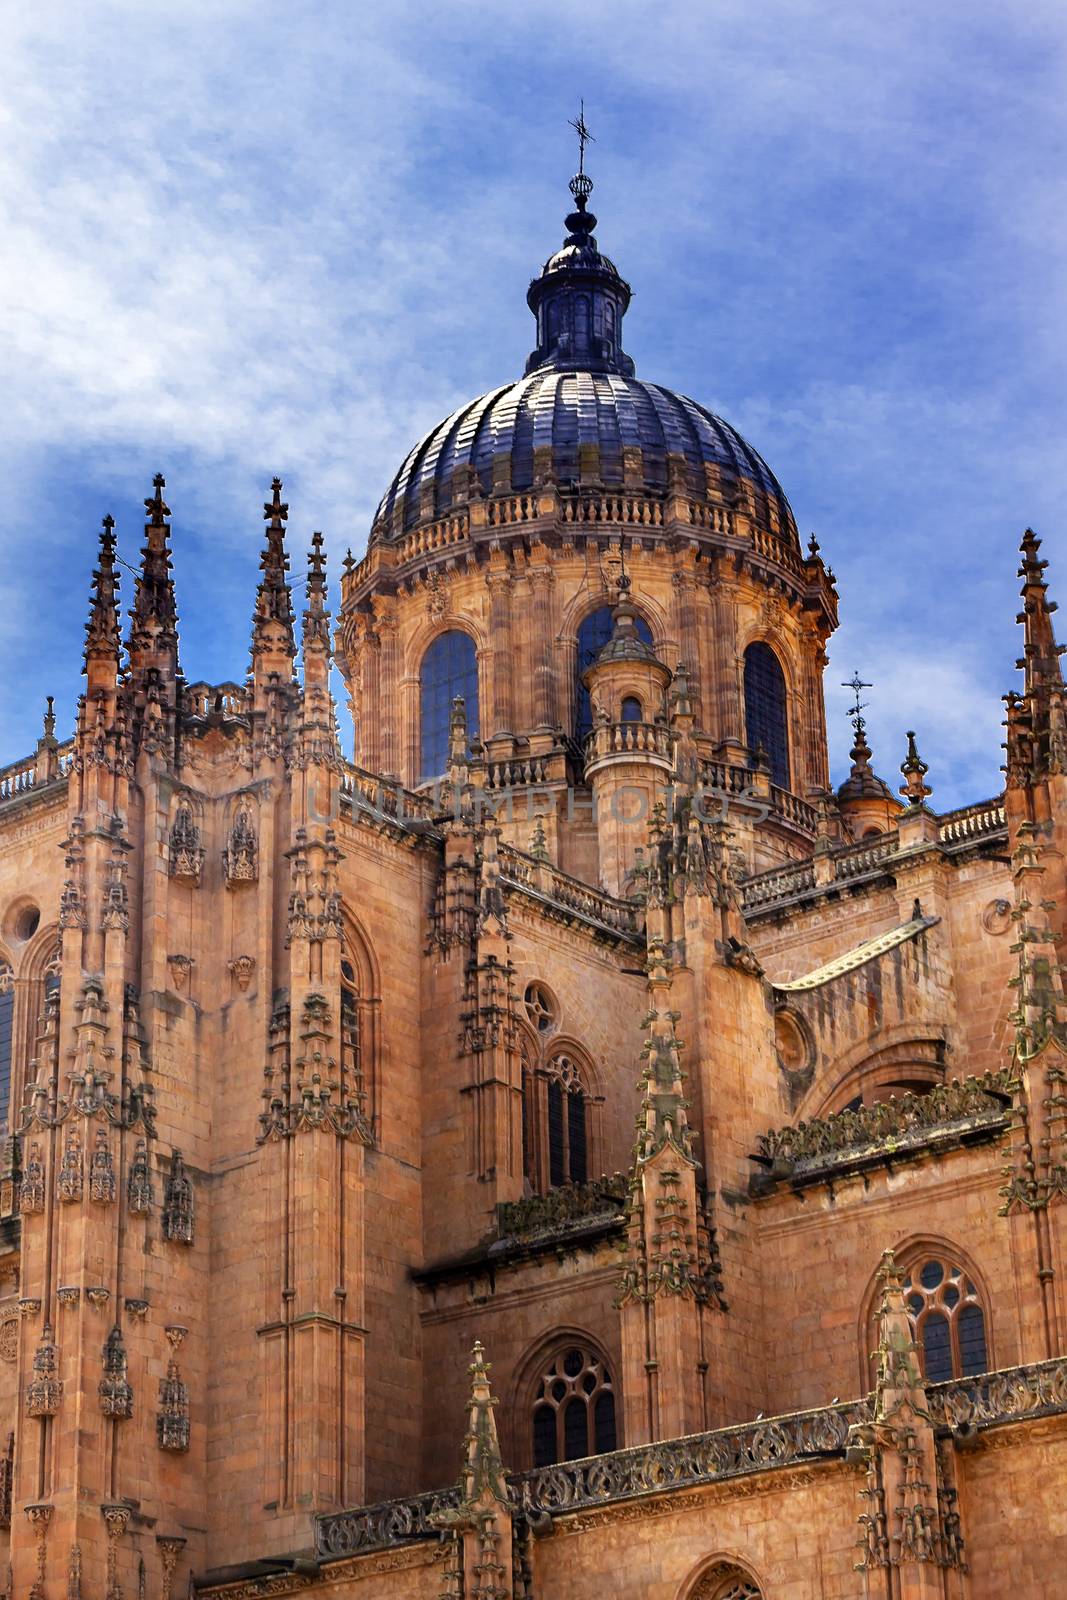 Stone Dome New Salamanca Cathedral Spain.  The New and Old Cathedrals in Salamanca are right next to each other.  New Cathedral was built from 1513 to 1733 and commissioned by Ferdinand V of Castile, Spain. 